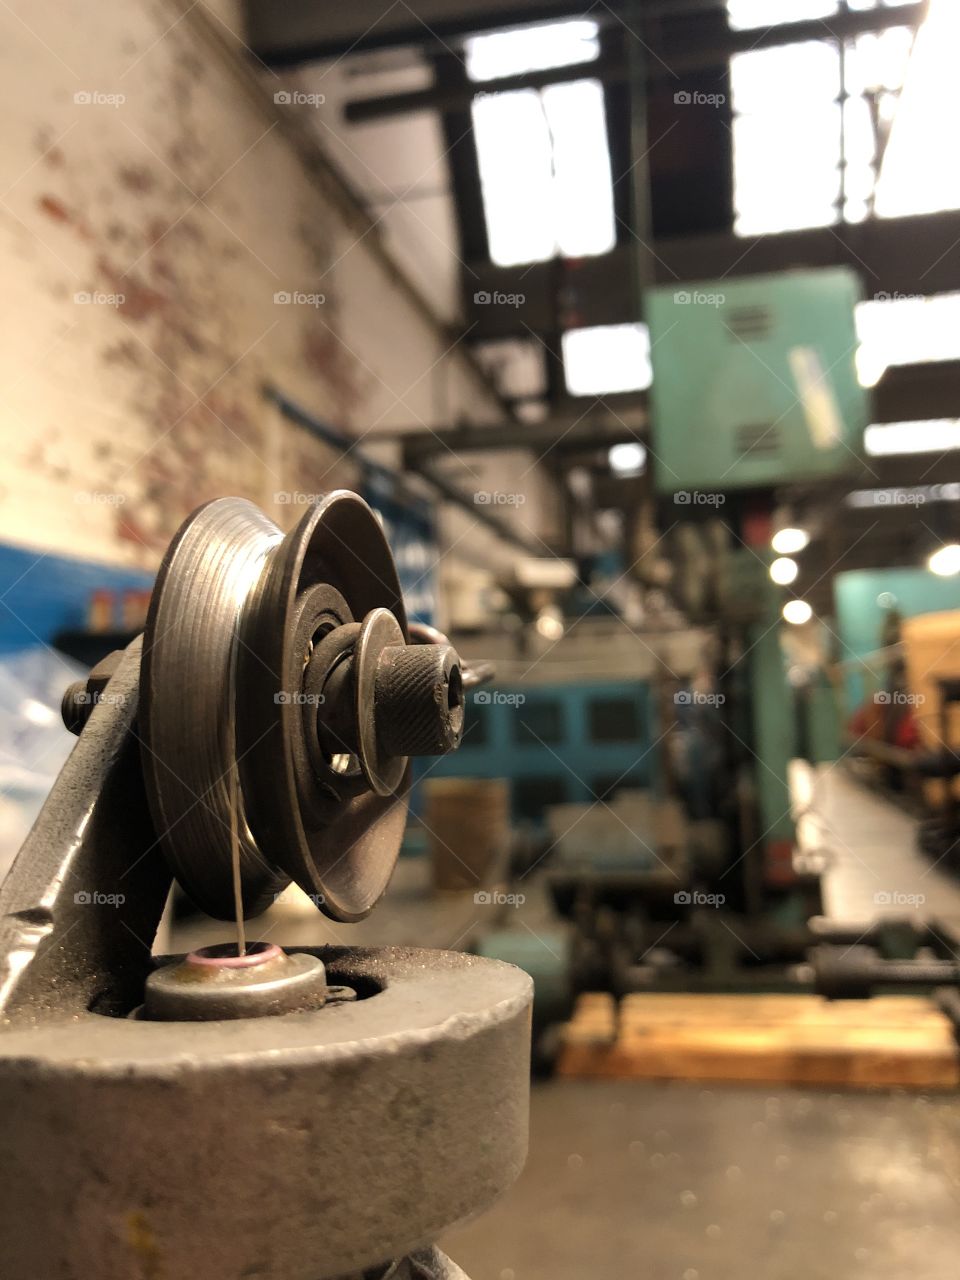 Tin Copper Threaded Onto A Wheel Machine In A Cable Factory 